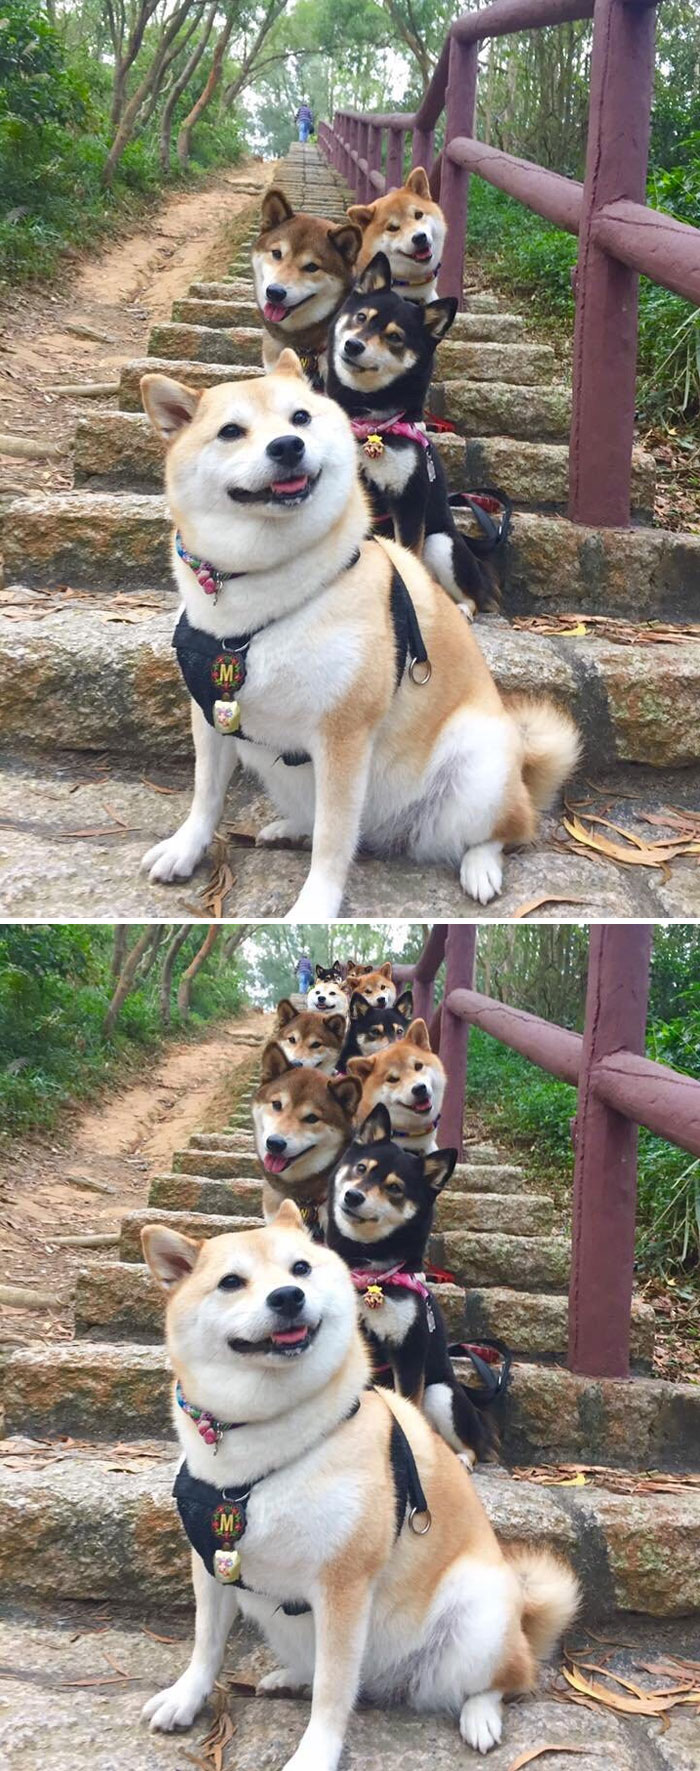 Doges Posing For A Photo